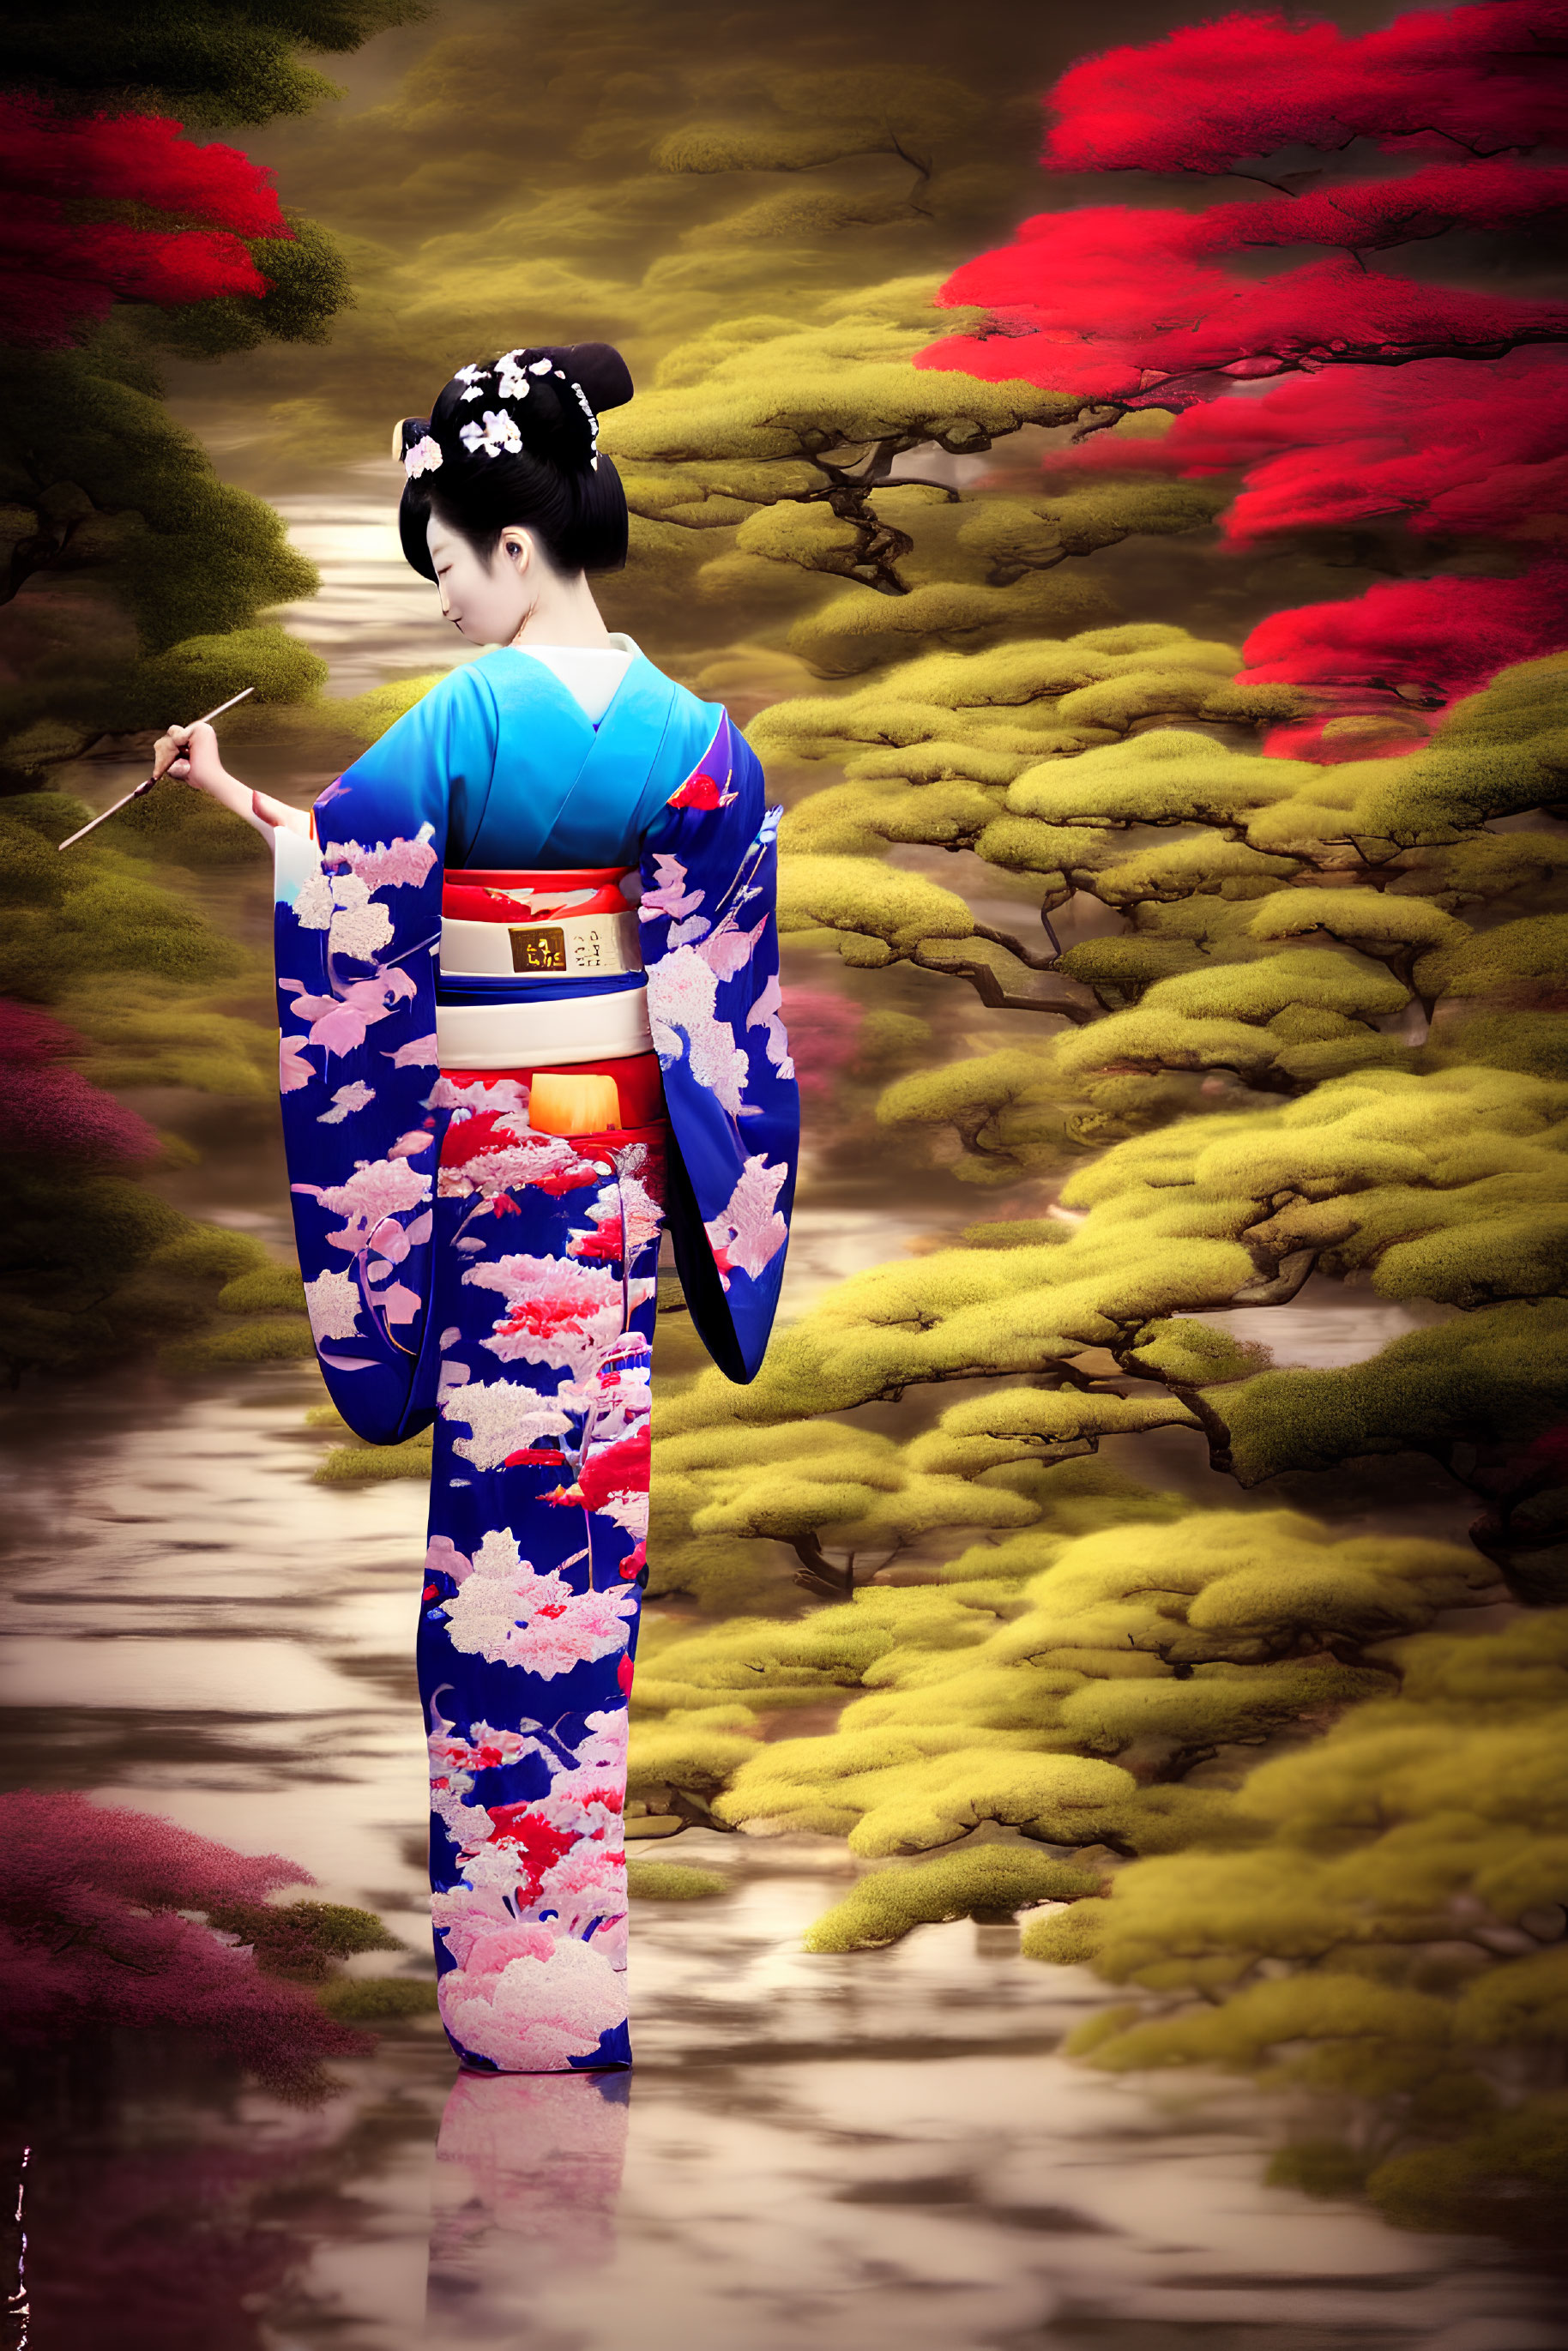 Colorful Kimono-Wearing Woman by Tranquil Pond in Vibrant Garden